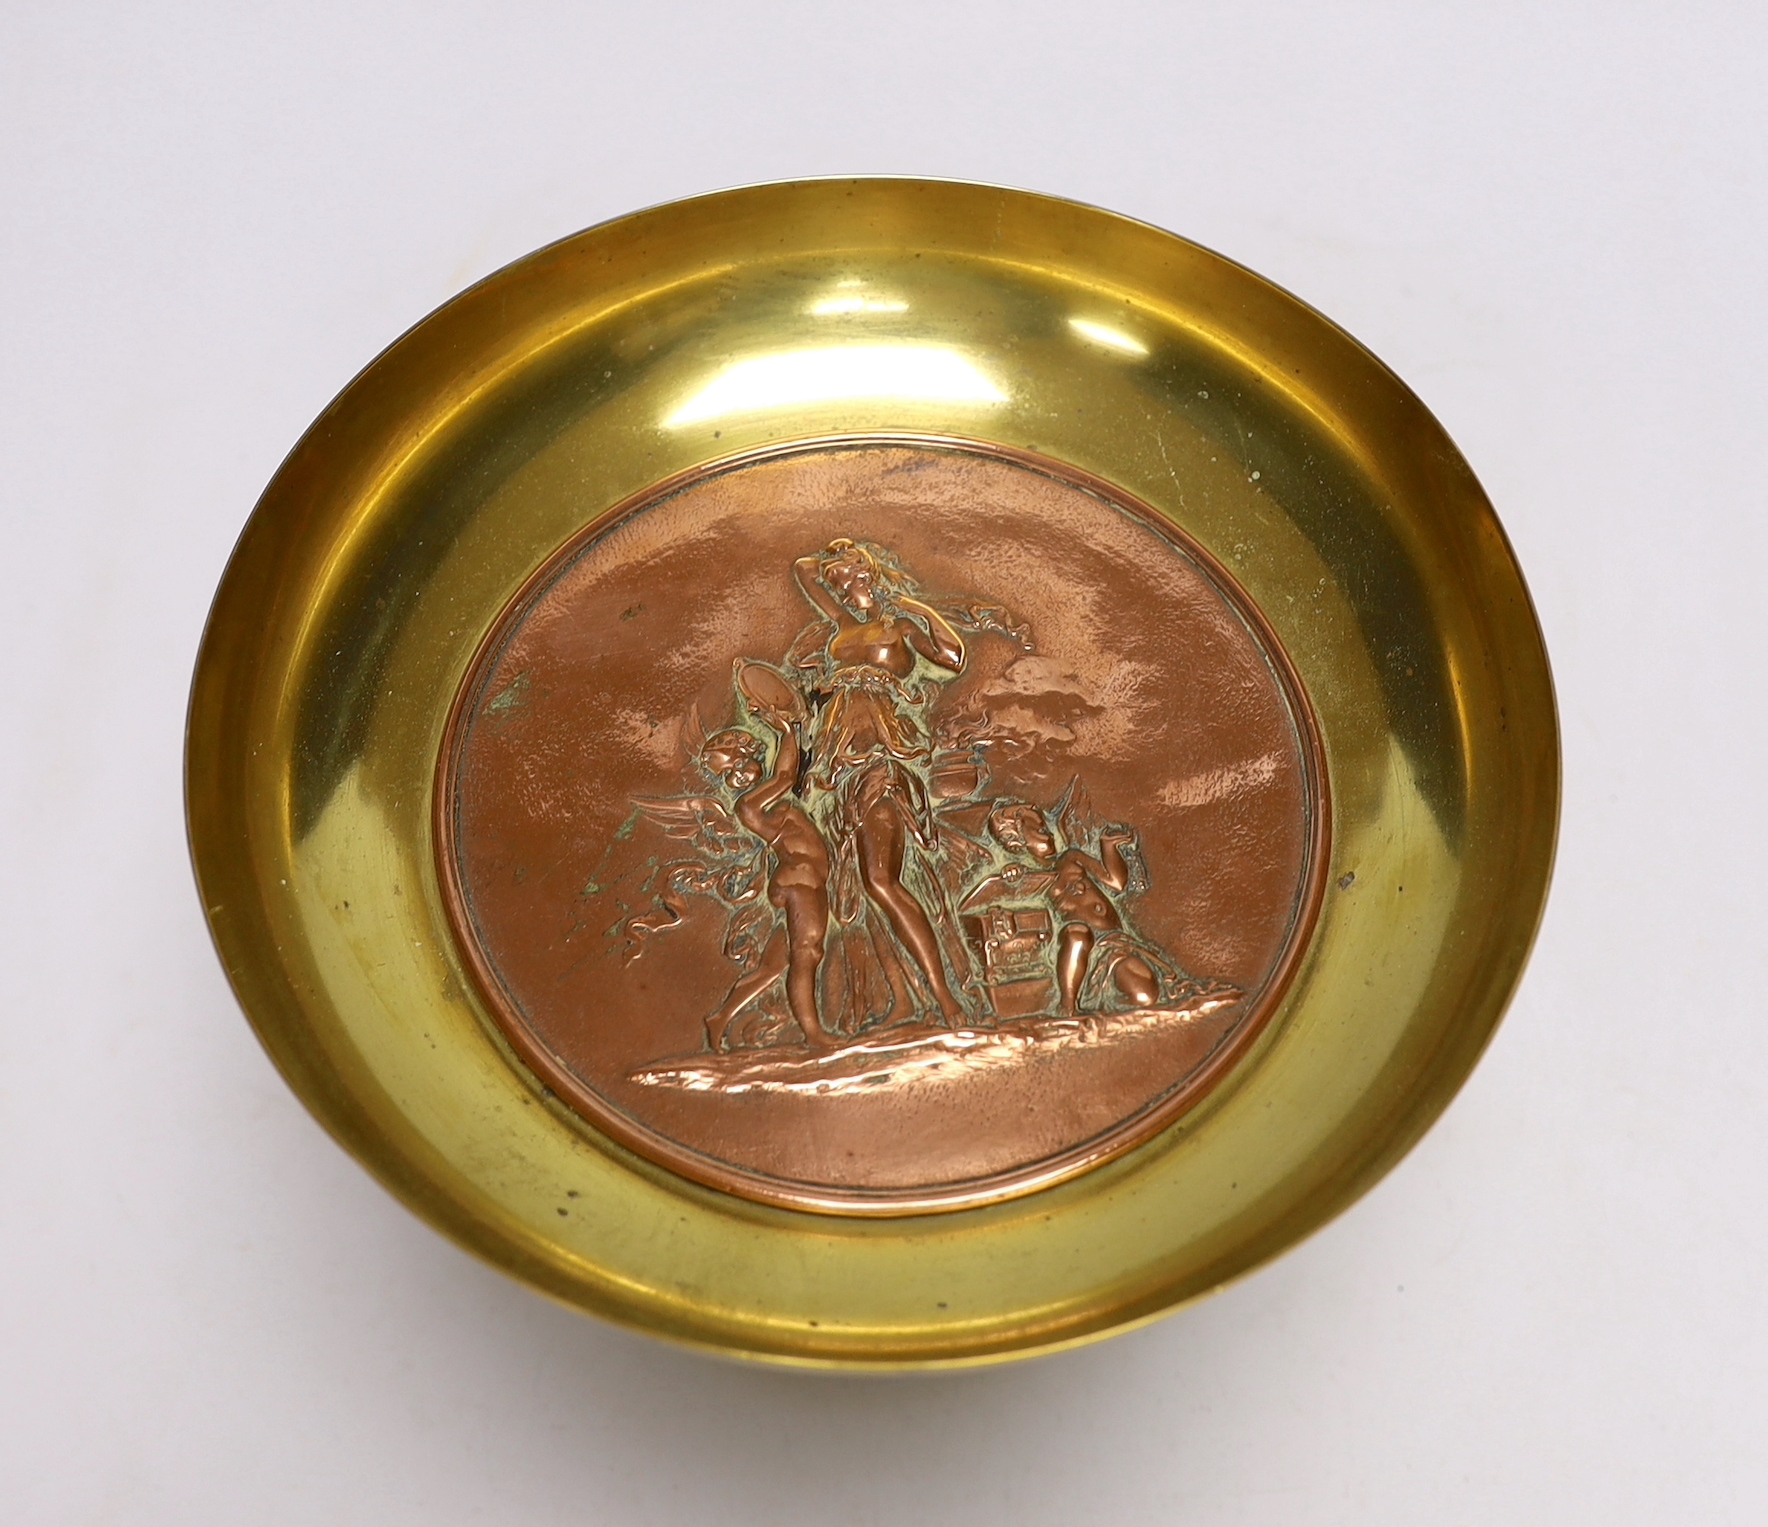 A bronze and copper embossed tazza, early 20th century, 19.5cm